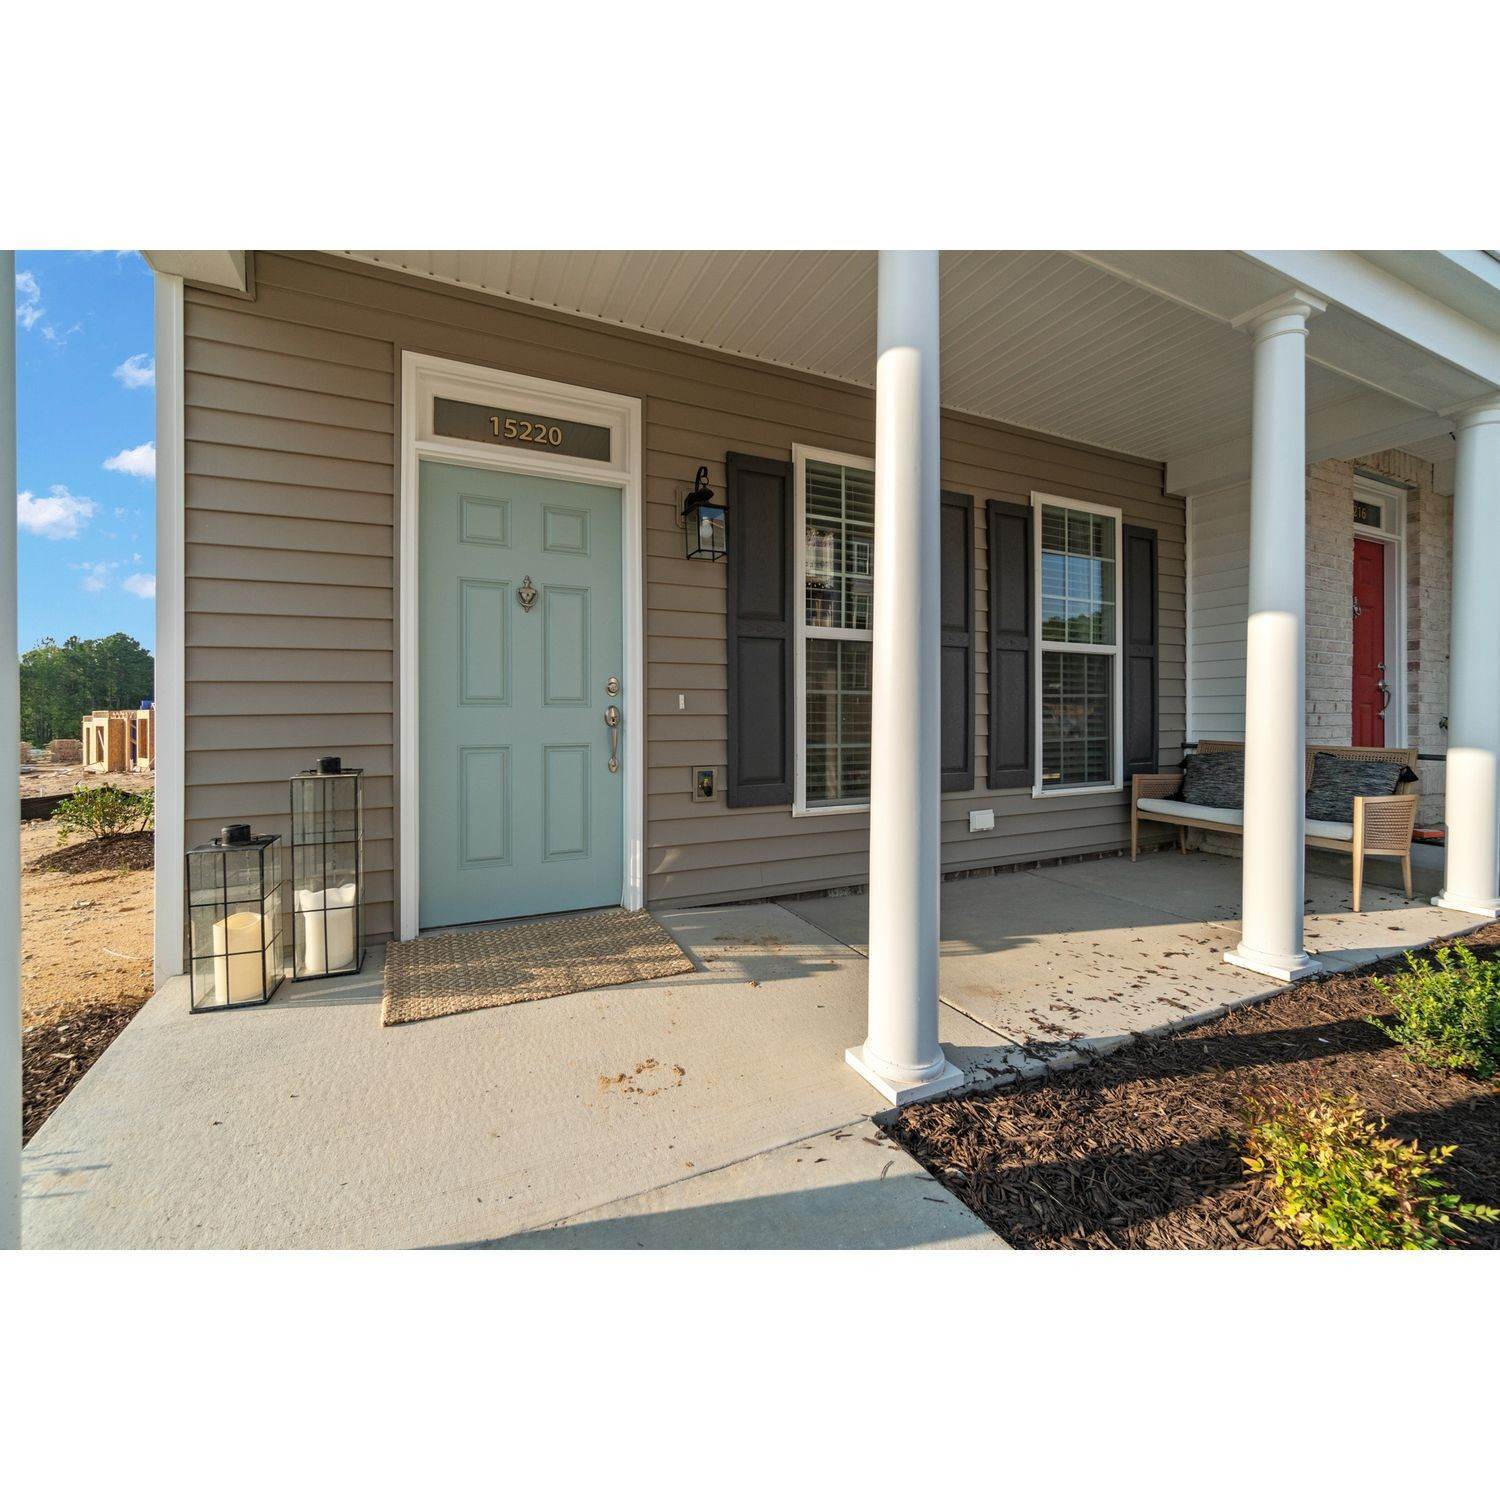 5. Cosby Village 3-Story Townhomes building at 15220 Dunton Avenue, Chesterfield, VA 23832